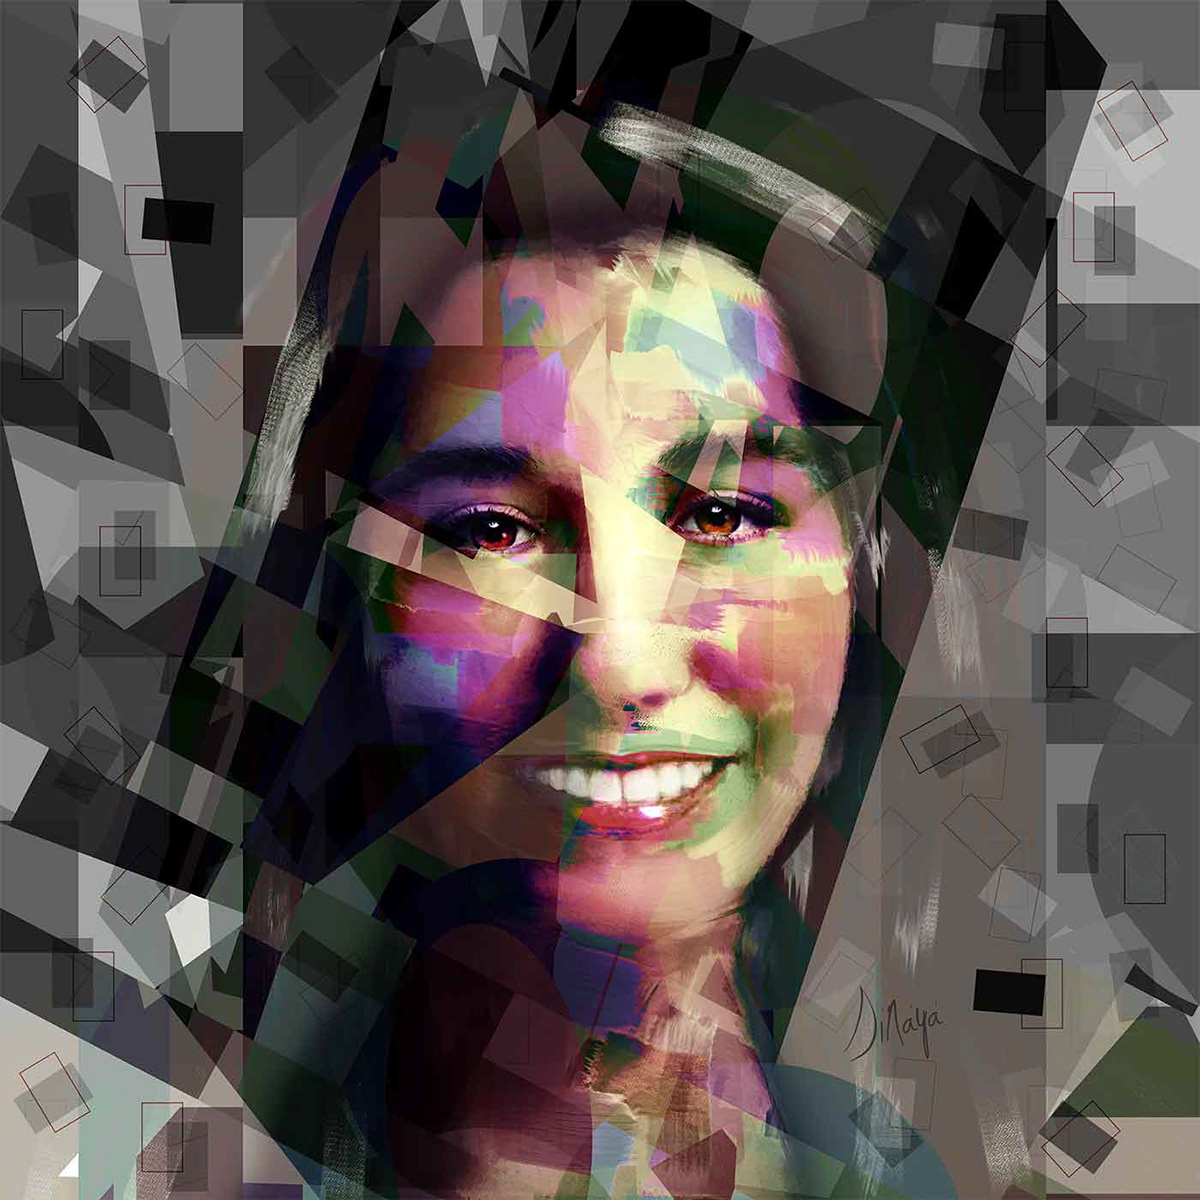 Woman's portrait using squares and rectangles